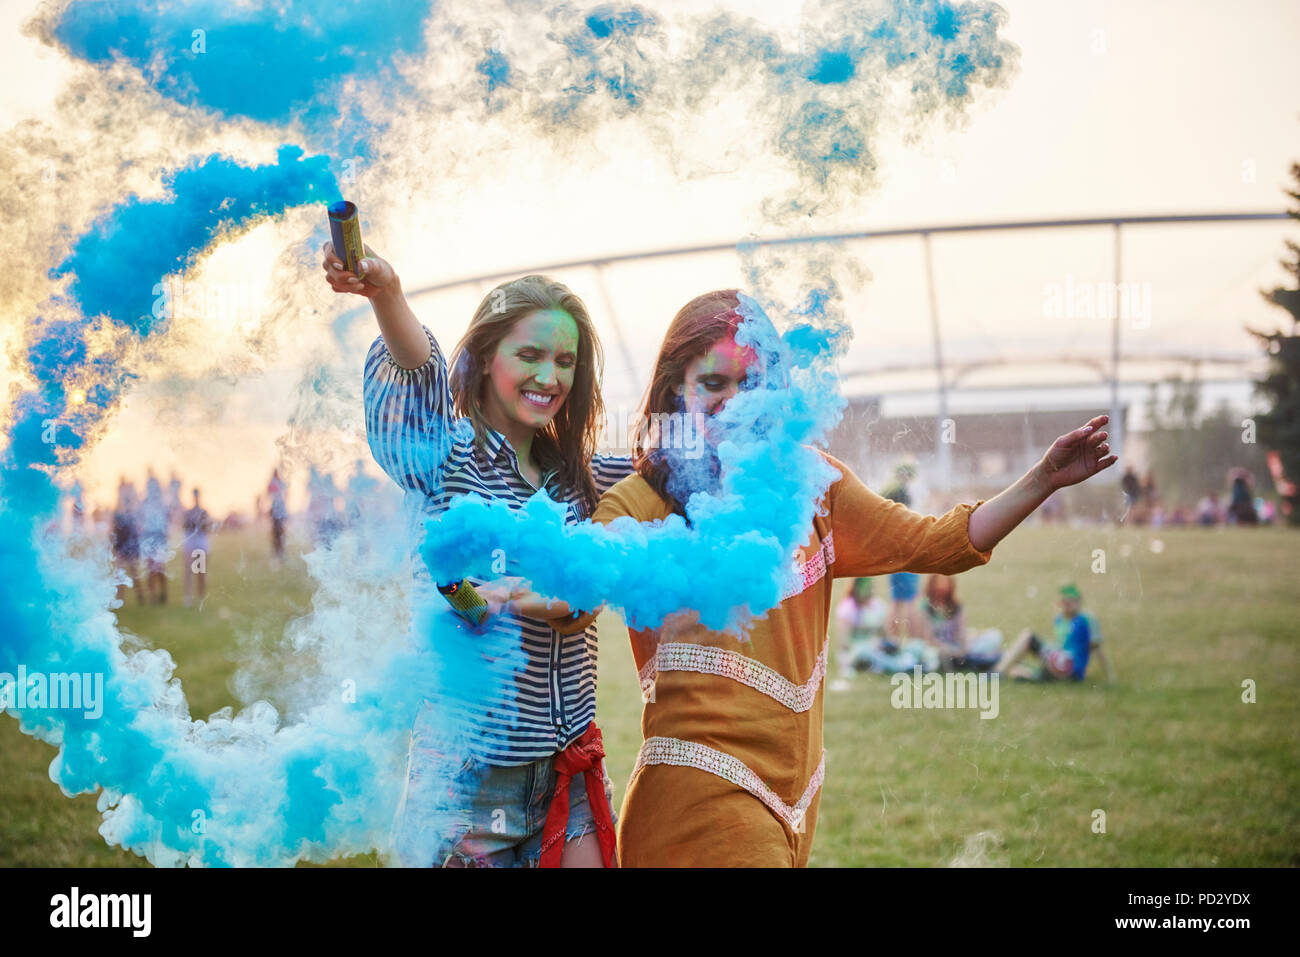 Two young women dancing with blue smoke bombs at Holi Festival Stock Photo